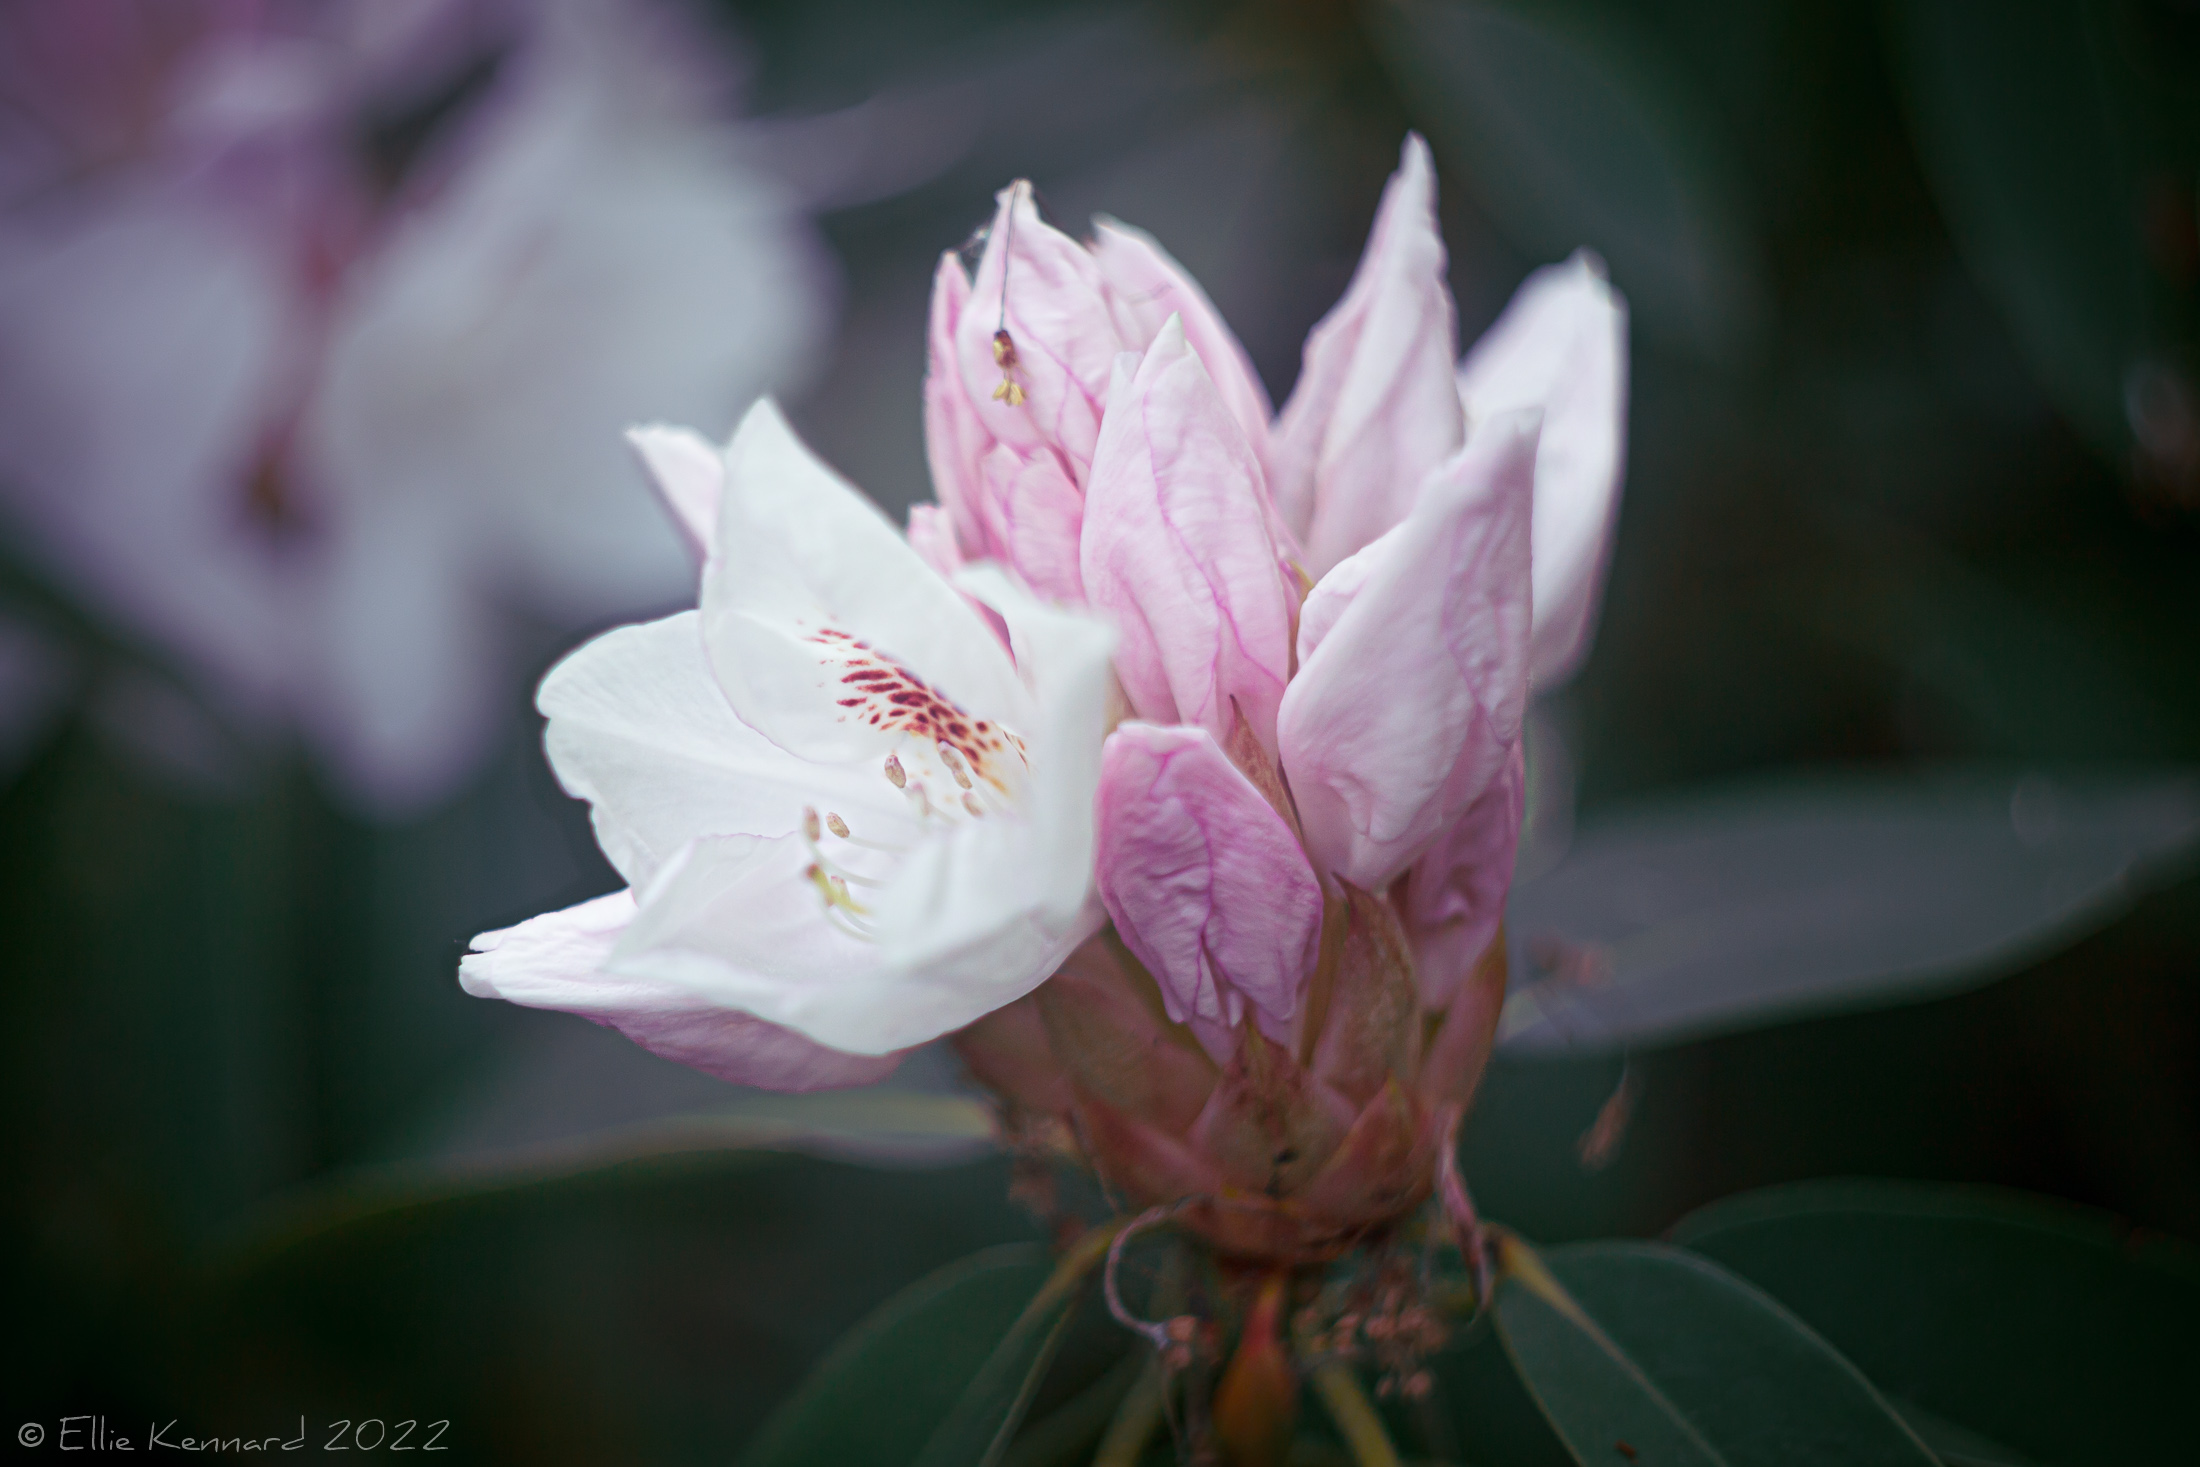 Rhododendron early flower